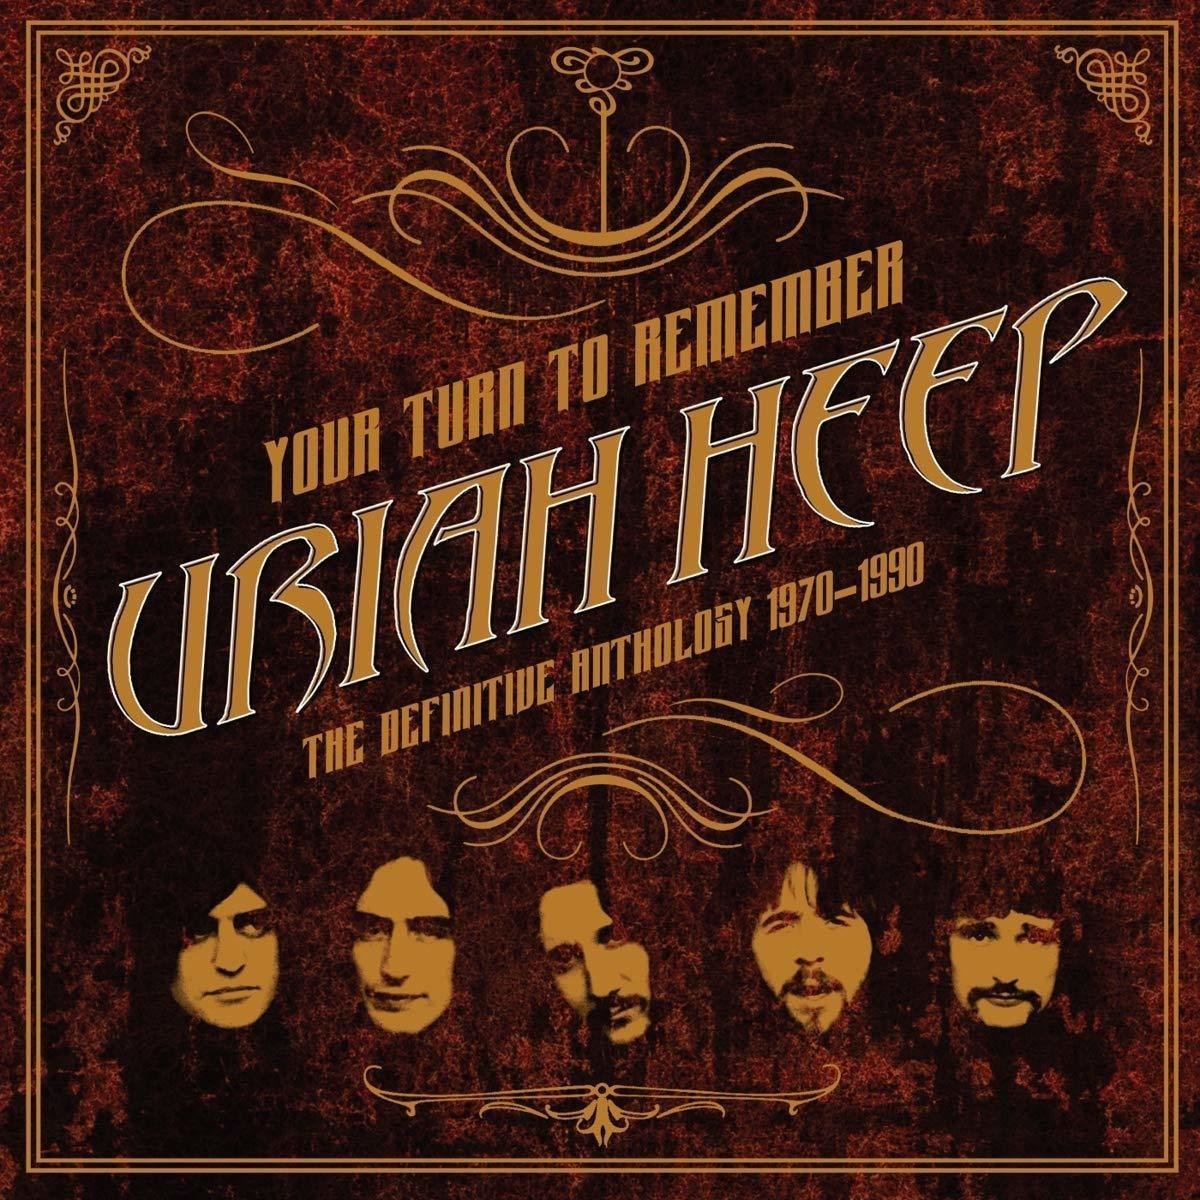 Vinylplade Uriah Heep - Your Turn To Remember: The Definitive Anthology 1970-1990 (LP)